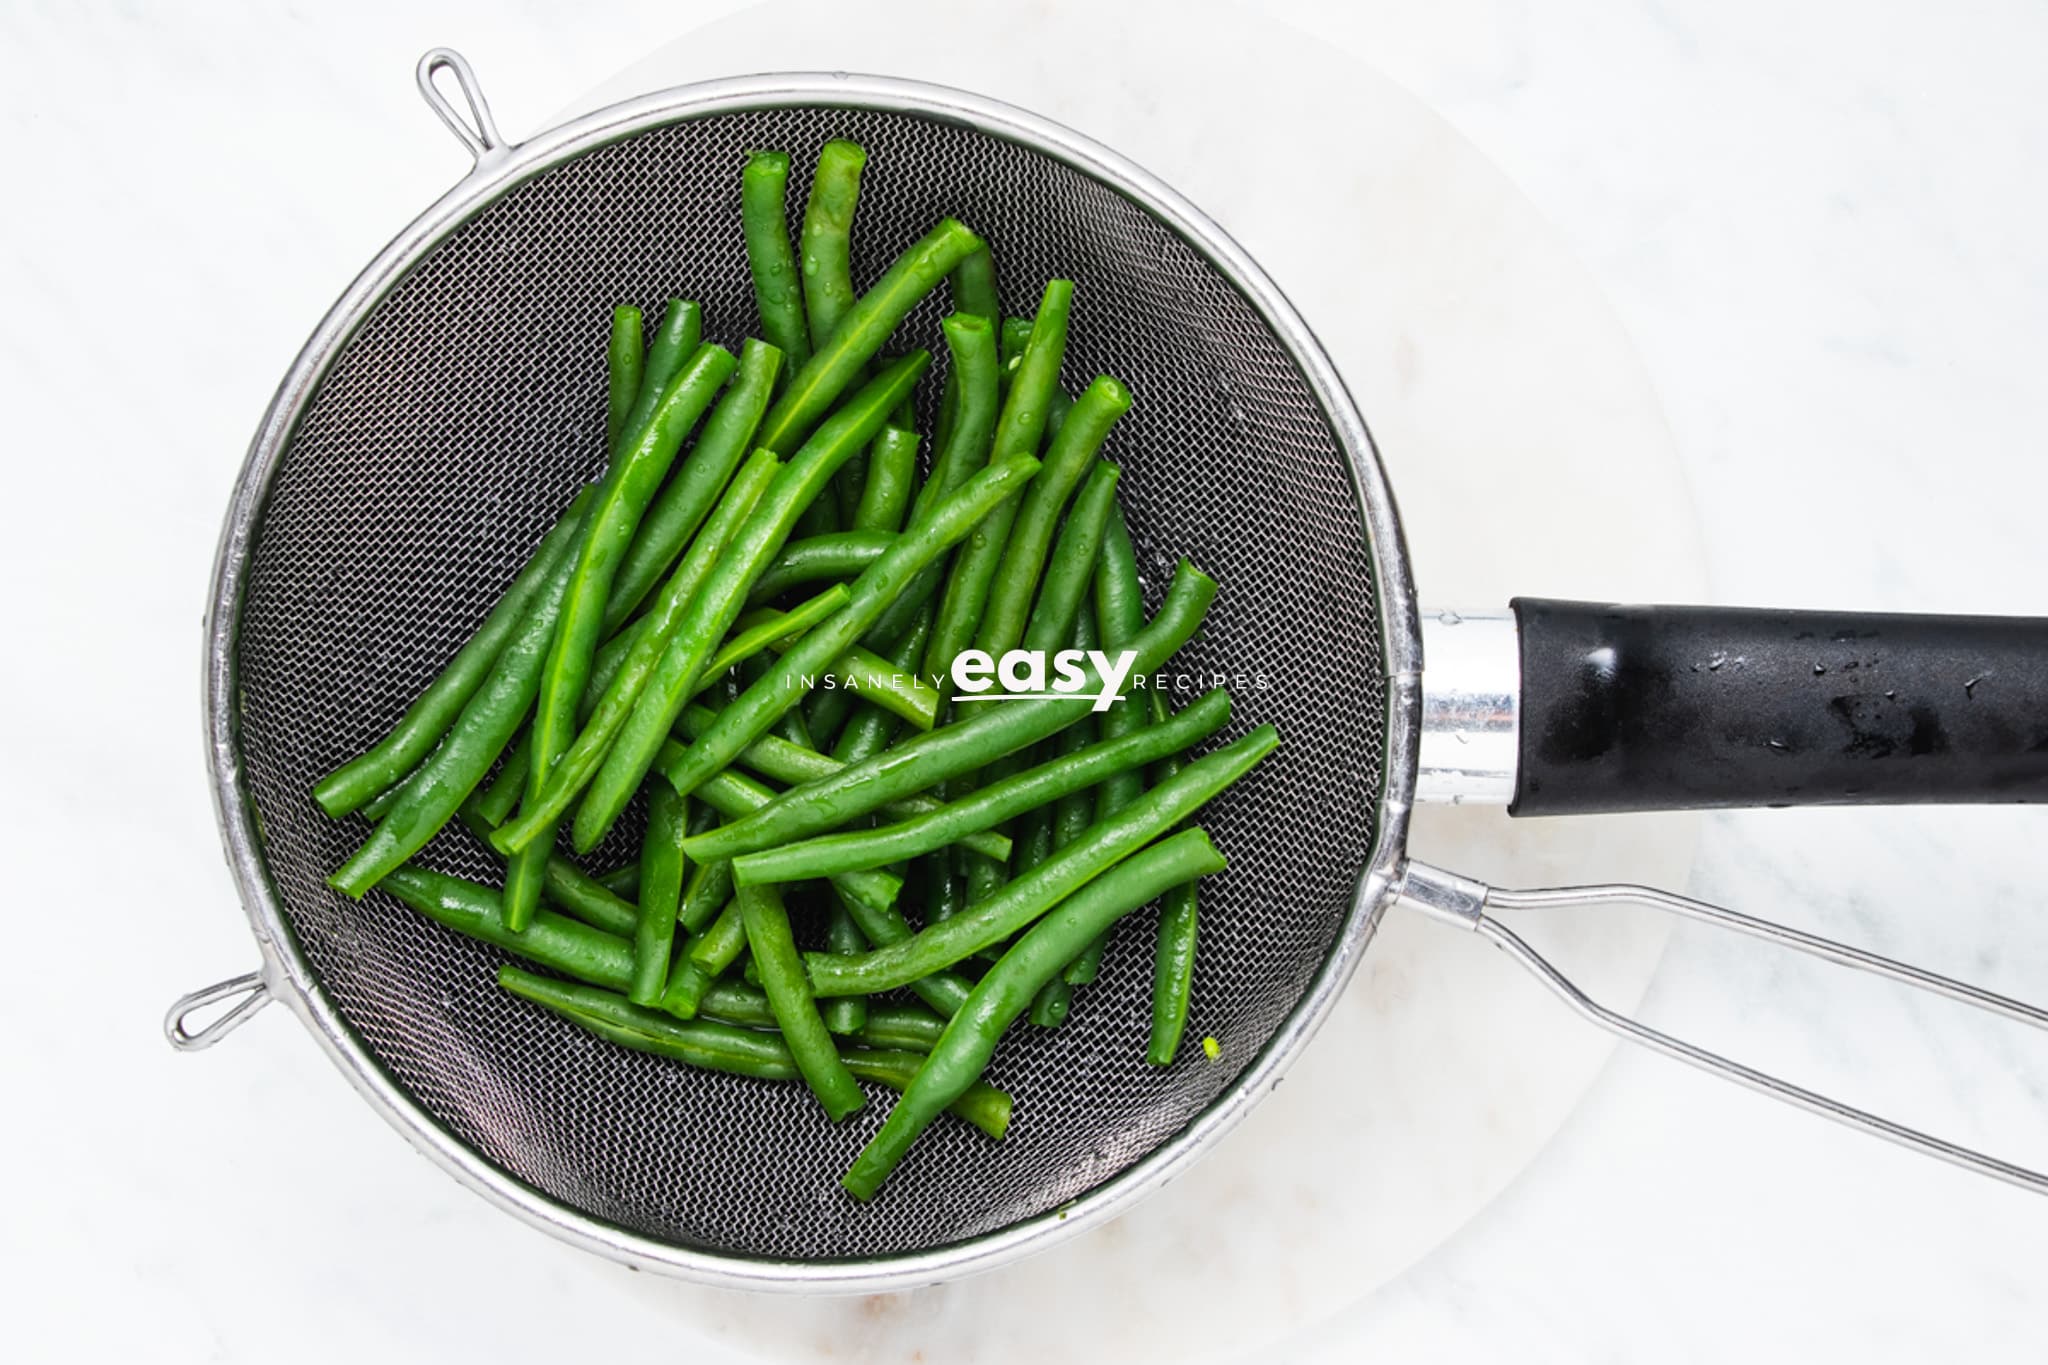 blanched green beans in a mesh strainer, viewed from above.